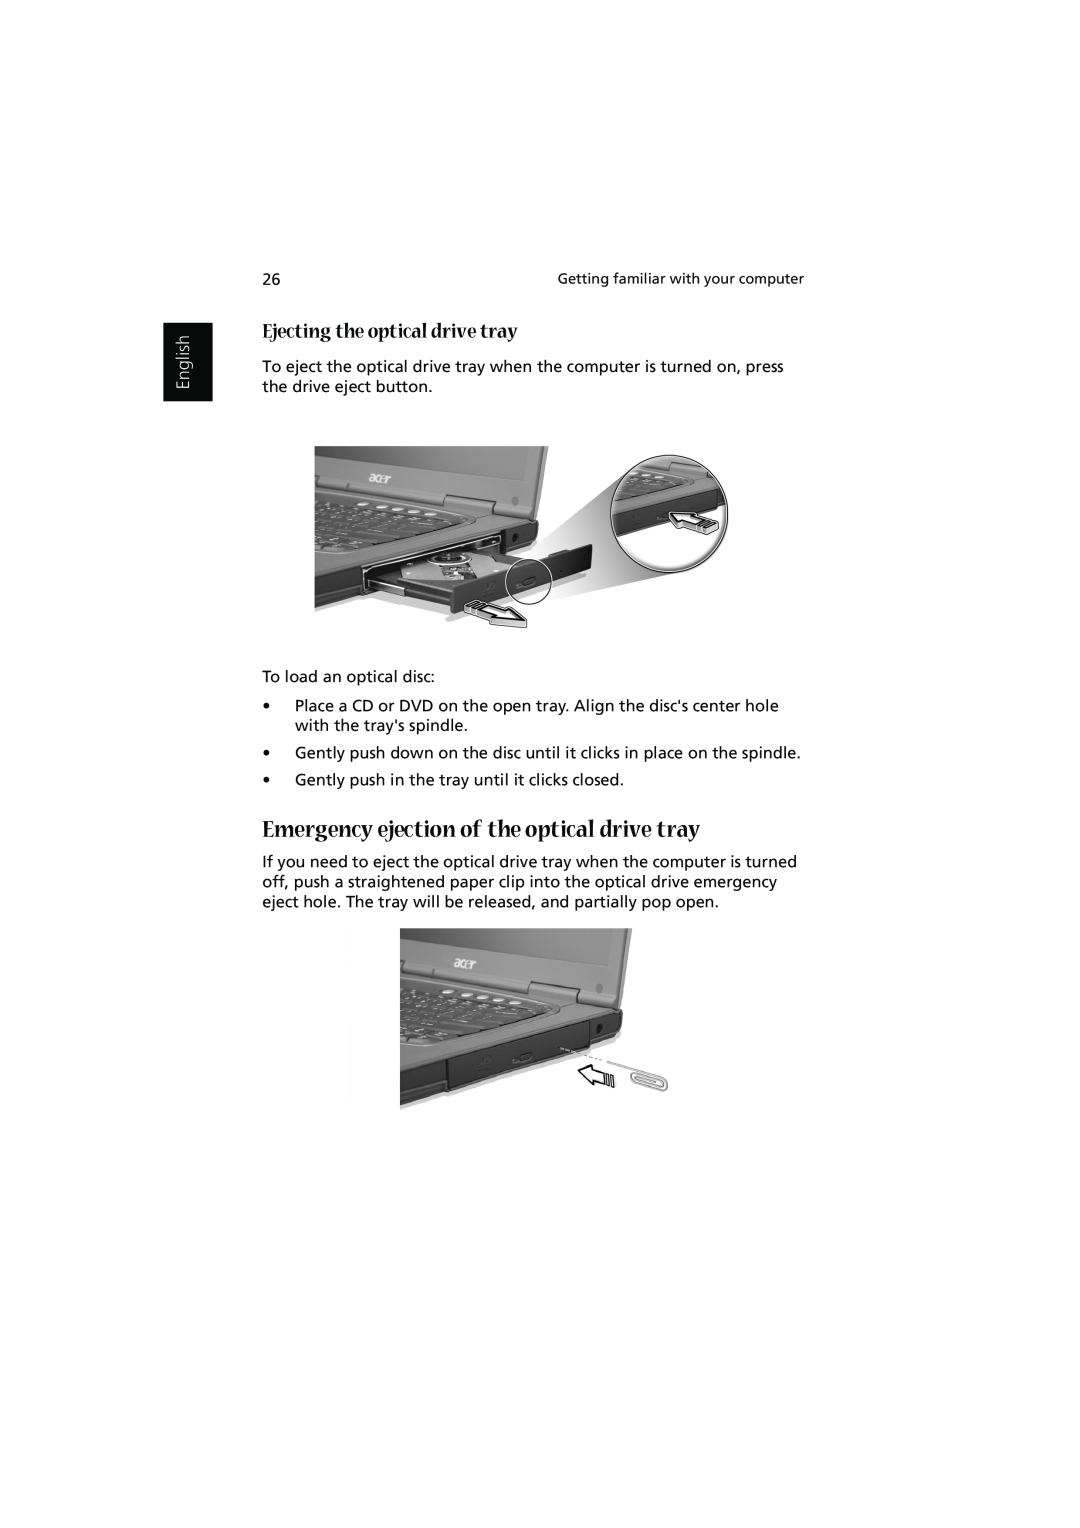 Acer 1450 manual Emergency ejection of the optical drive tray, Ejecting the optical drive tray, English 